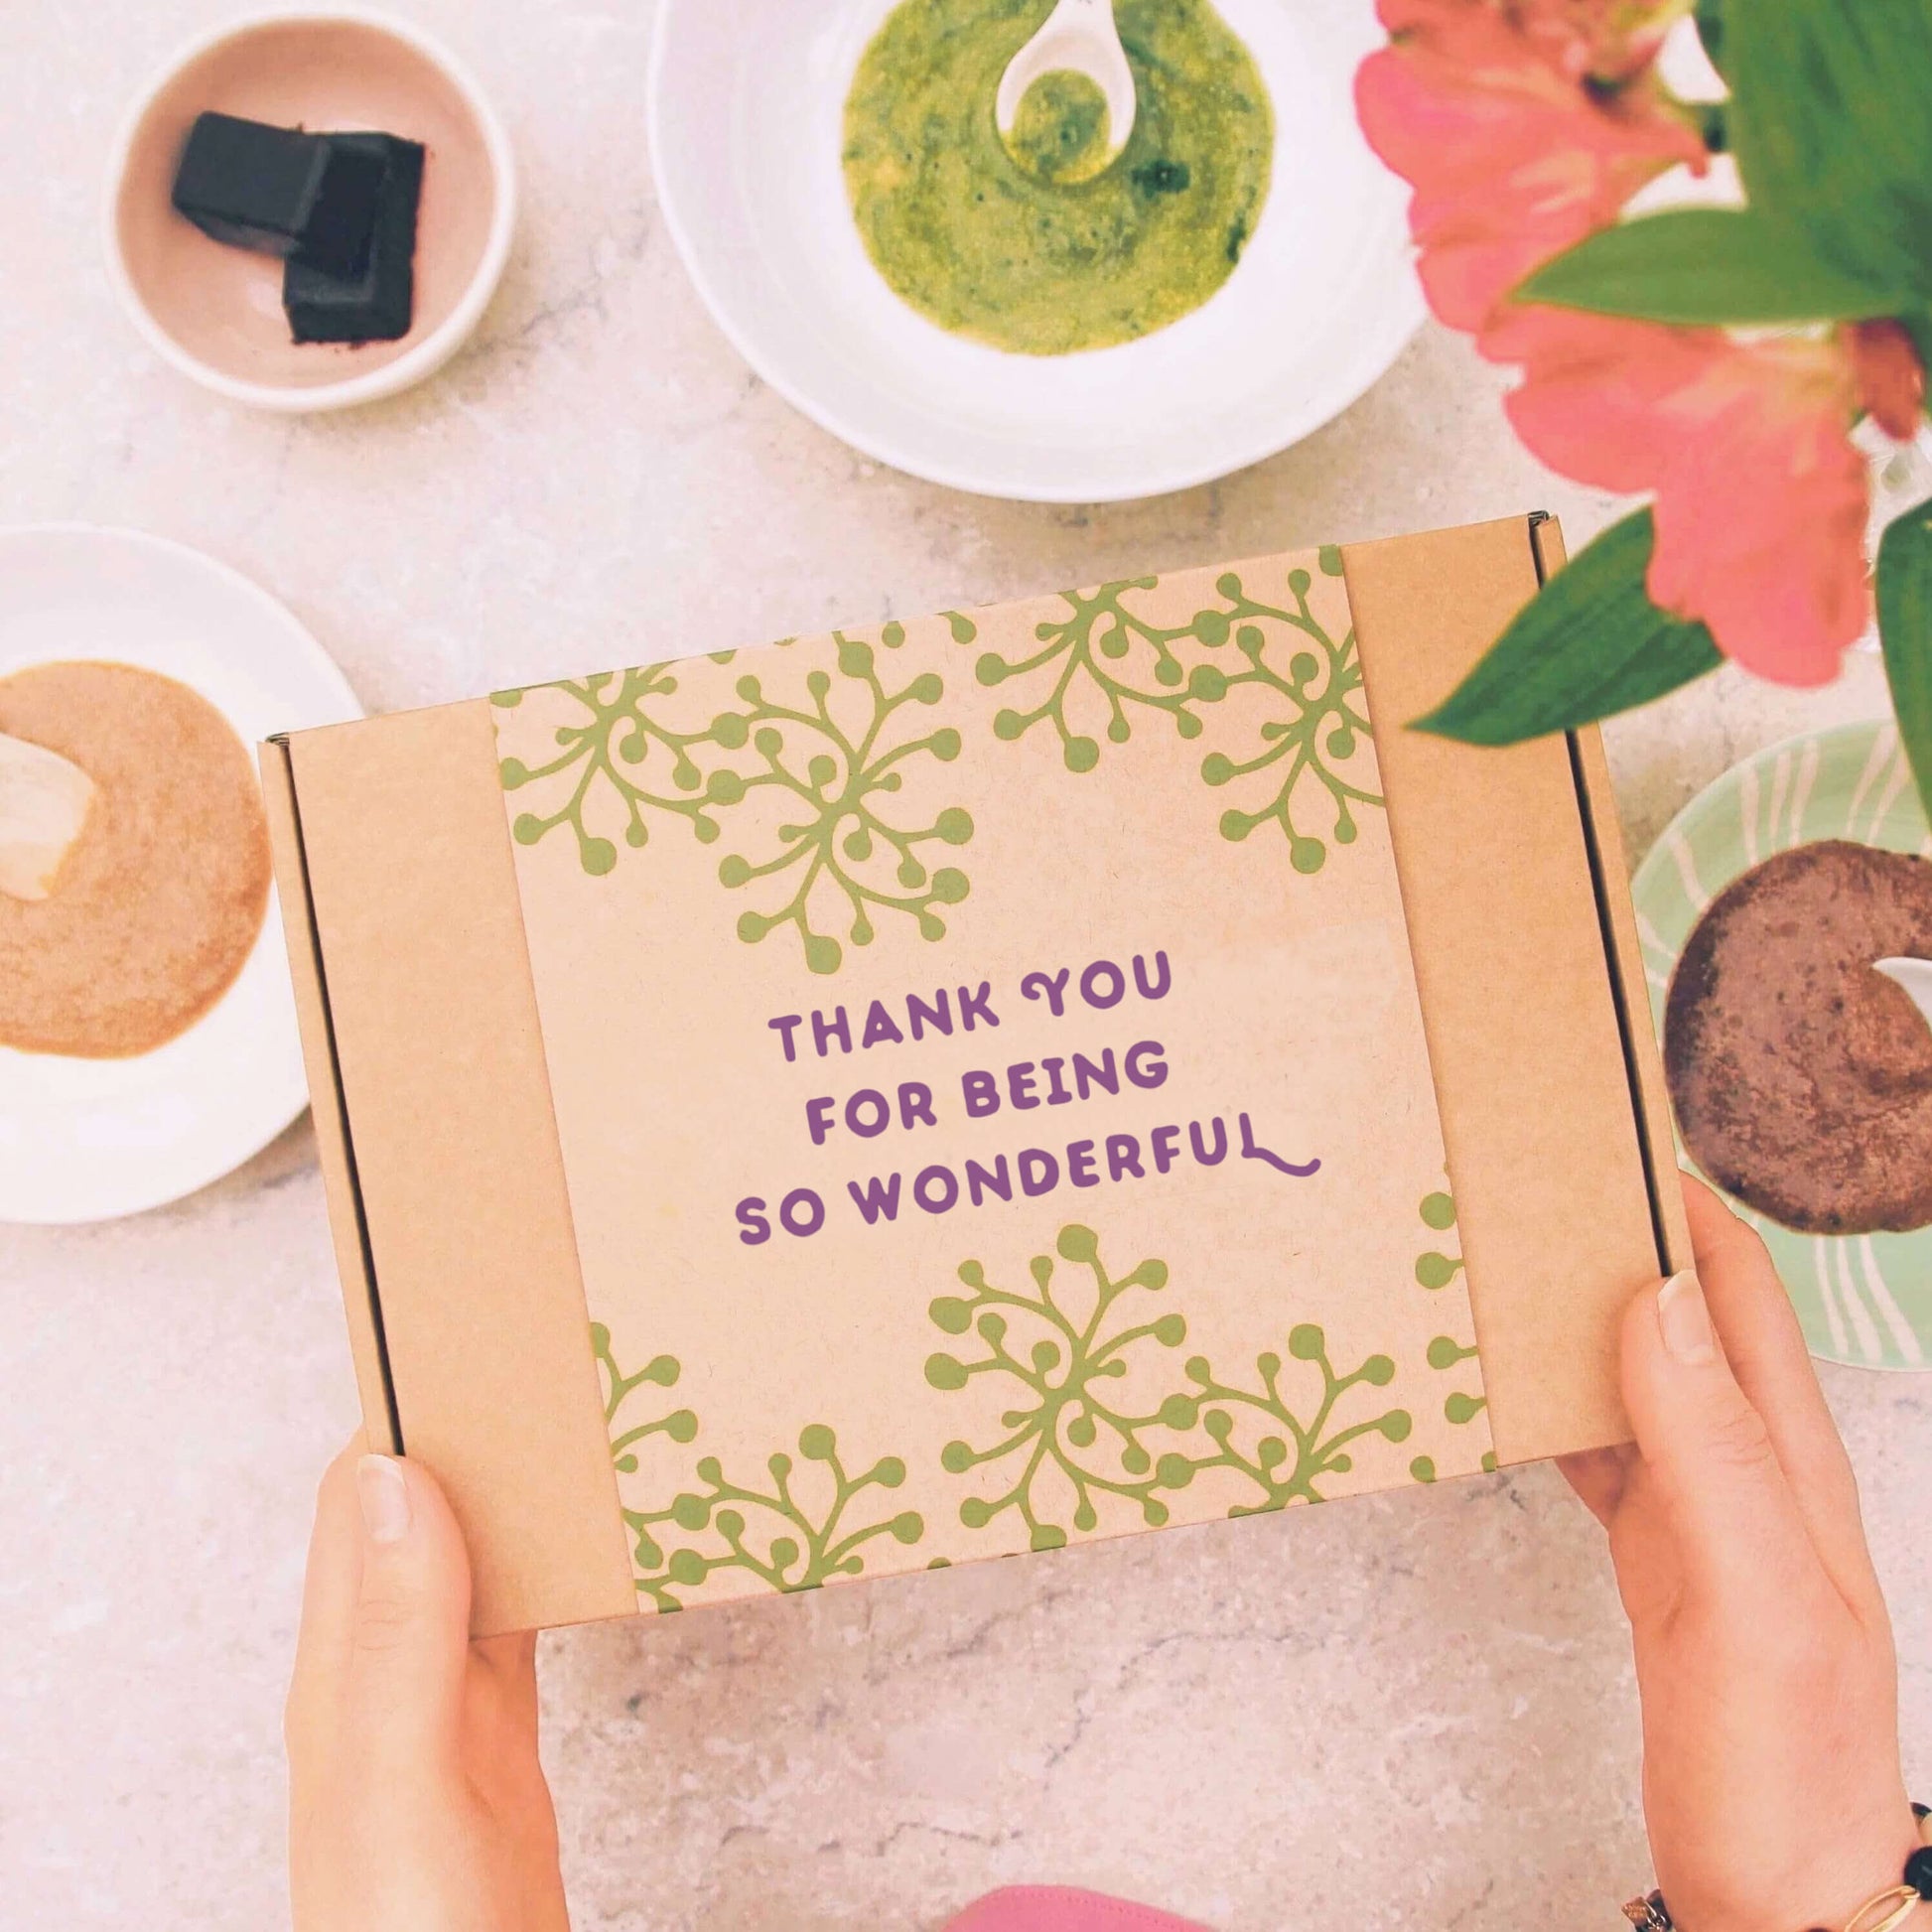 thank you letterbox gift with gift message 'thank you for being so wonderful'